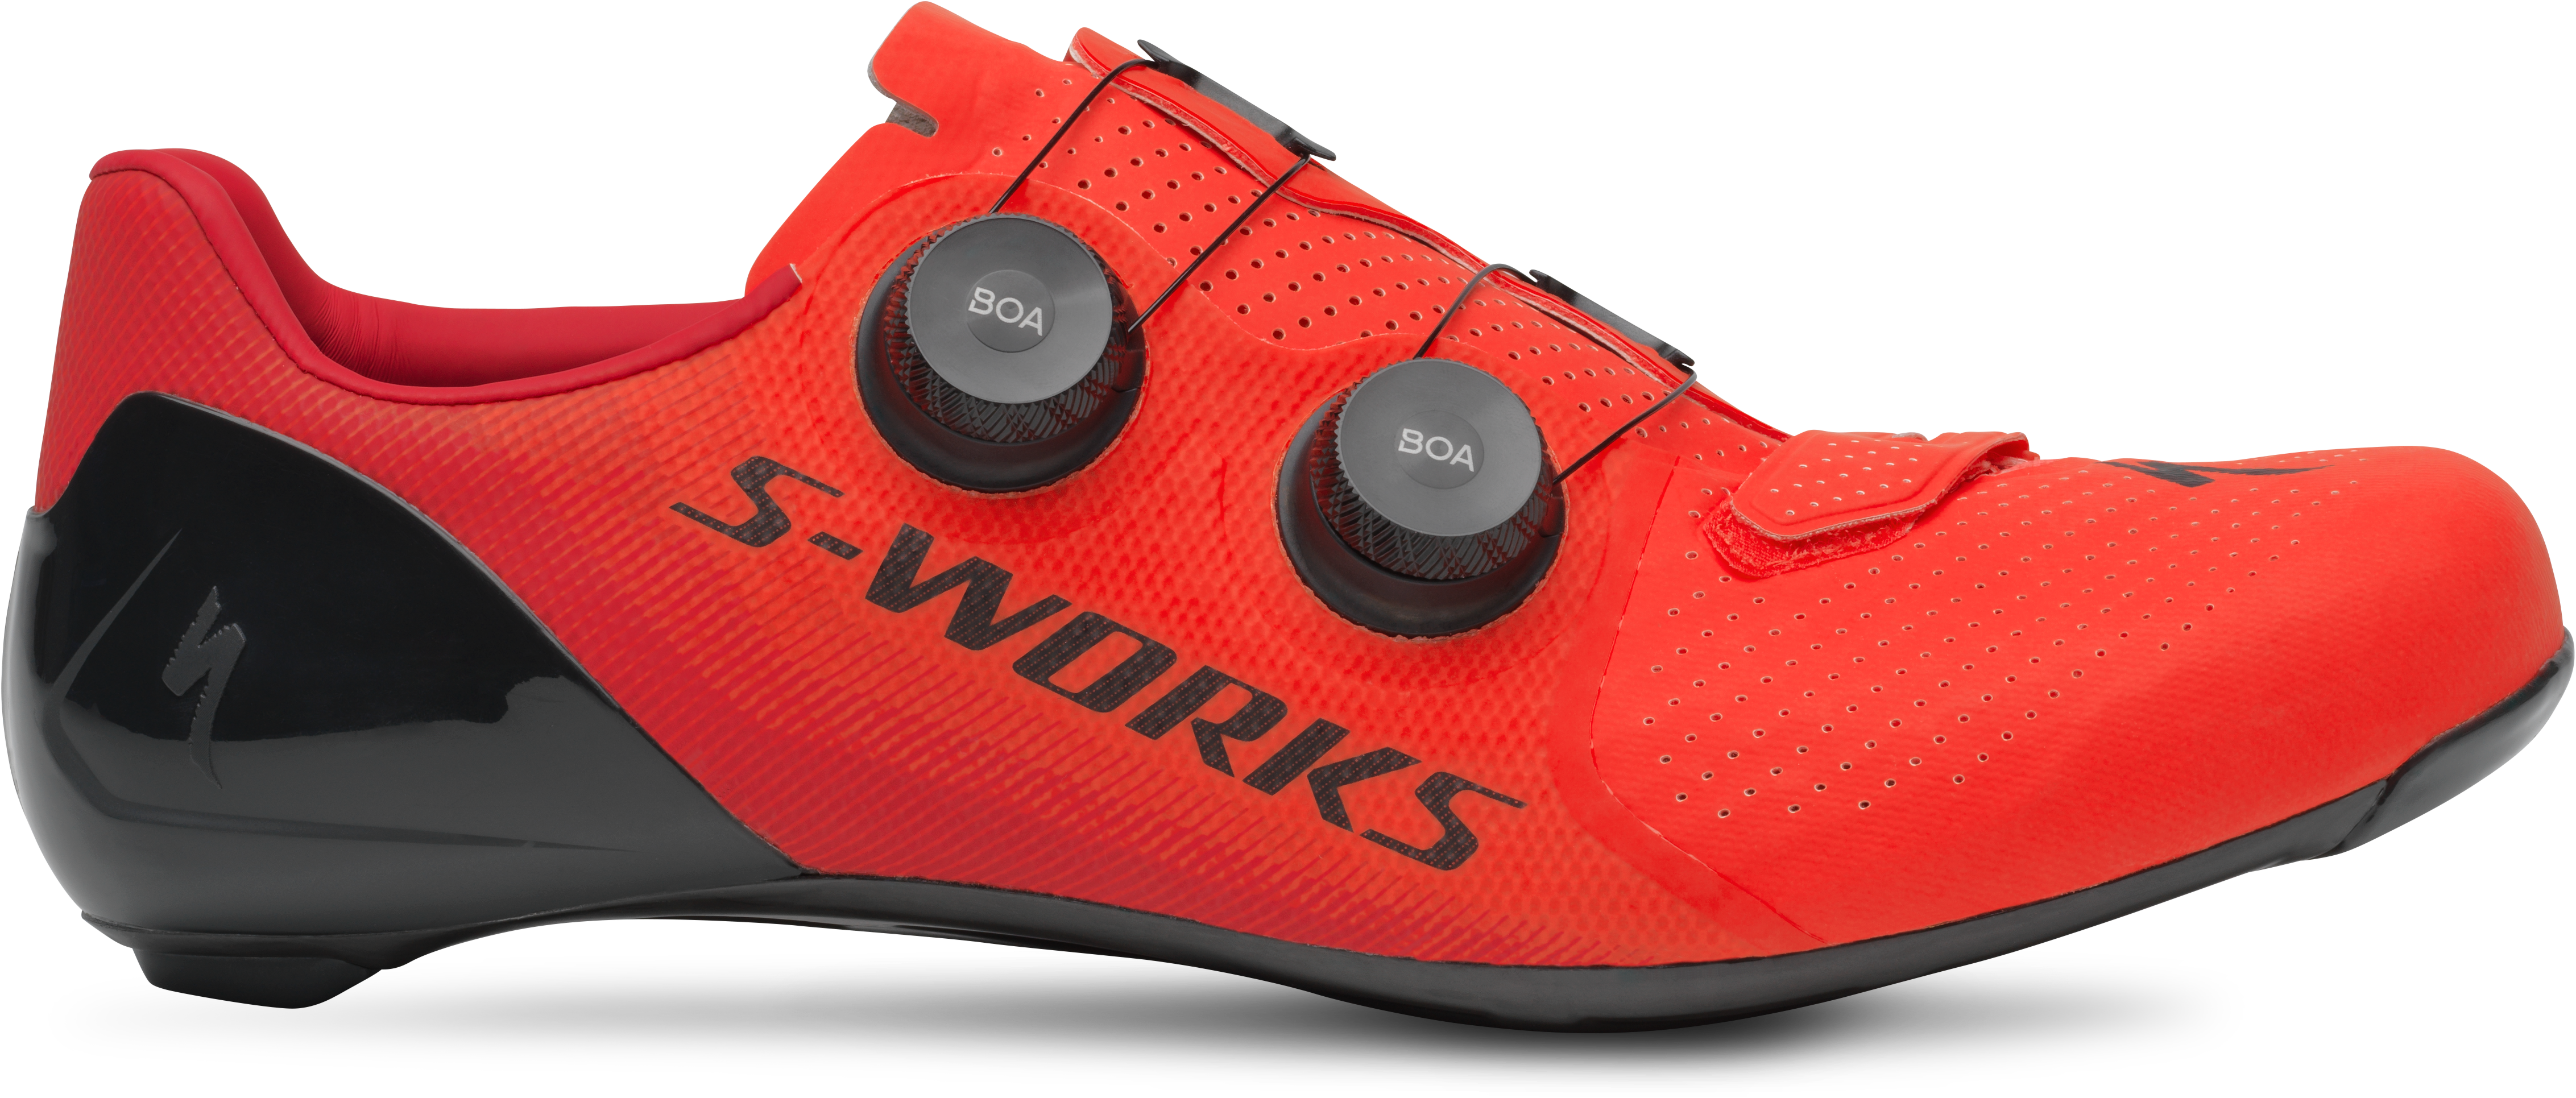 S-WORKS 7 ROAD SHOES ROCKET RED/CANDY RED39(39 (25cm) ロケット